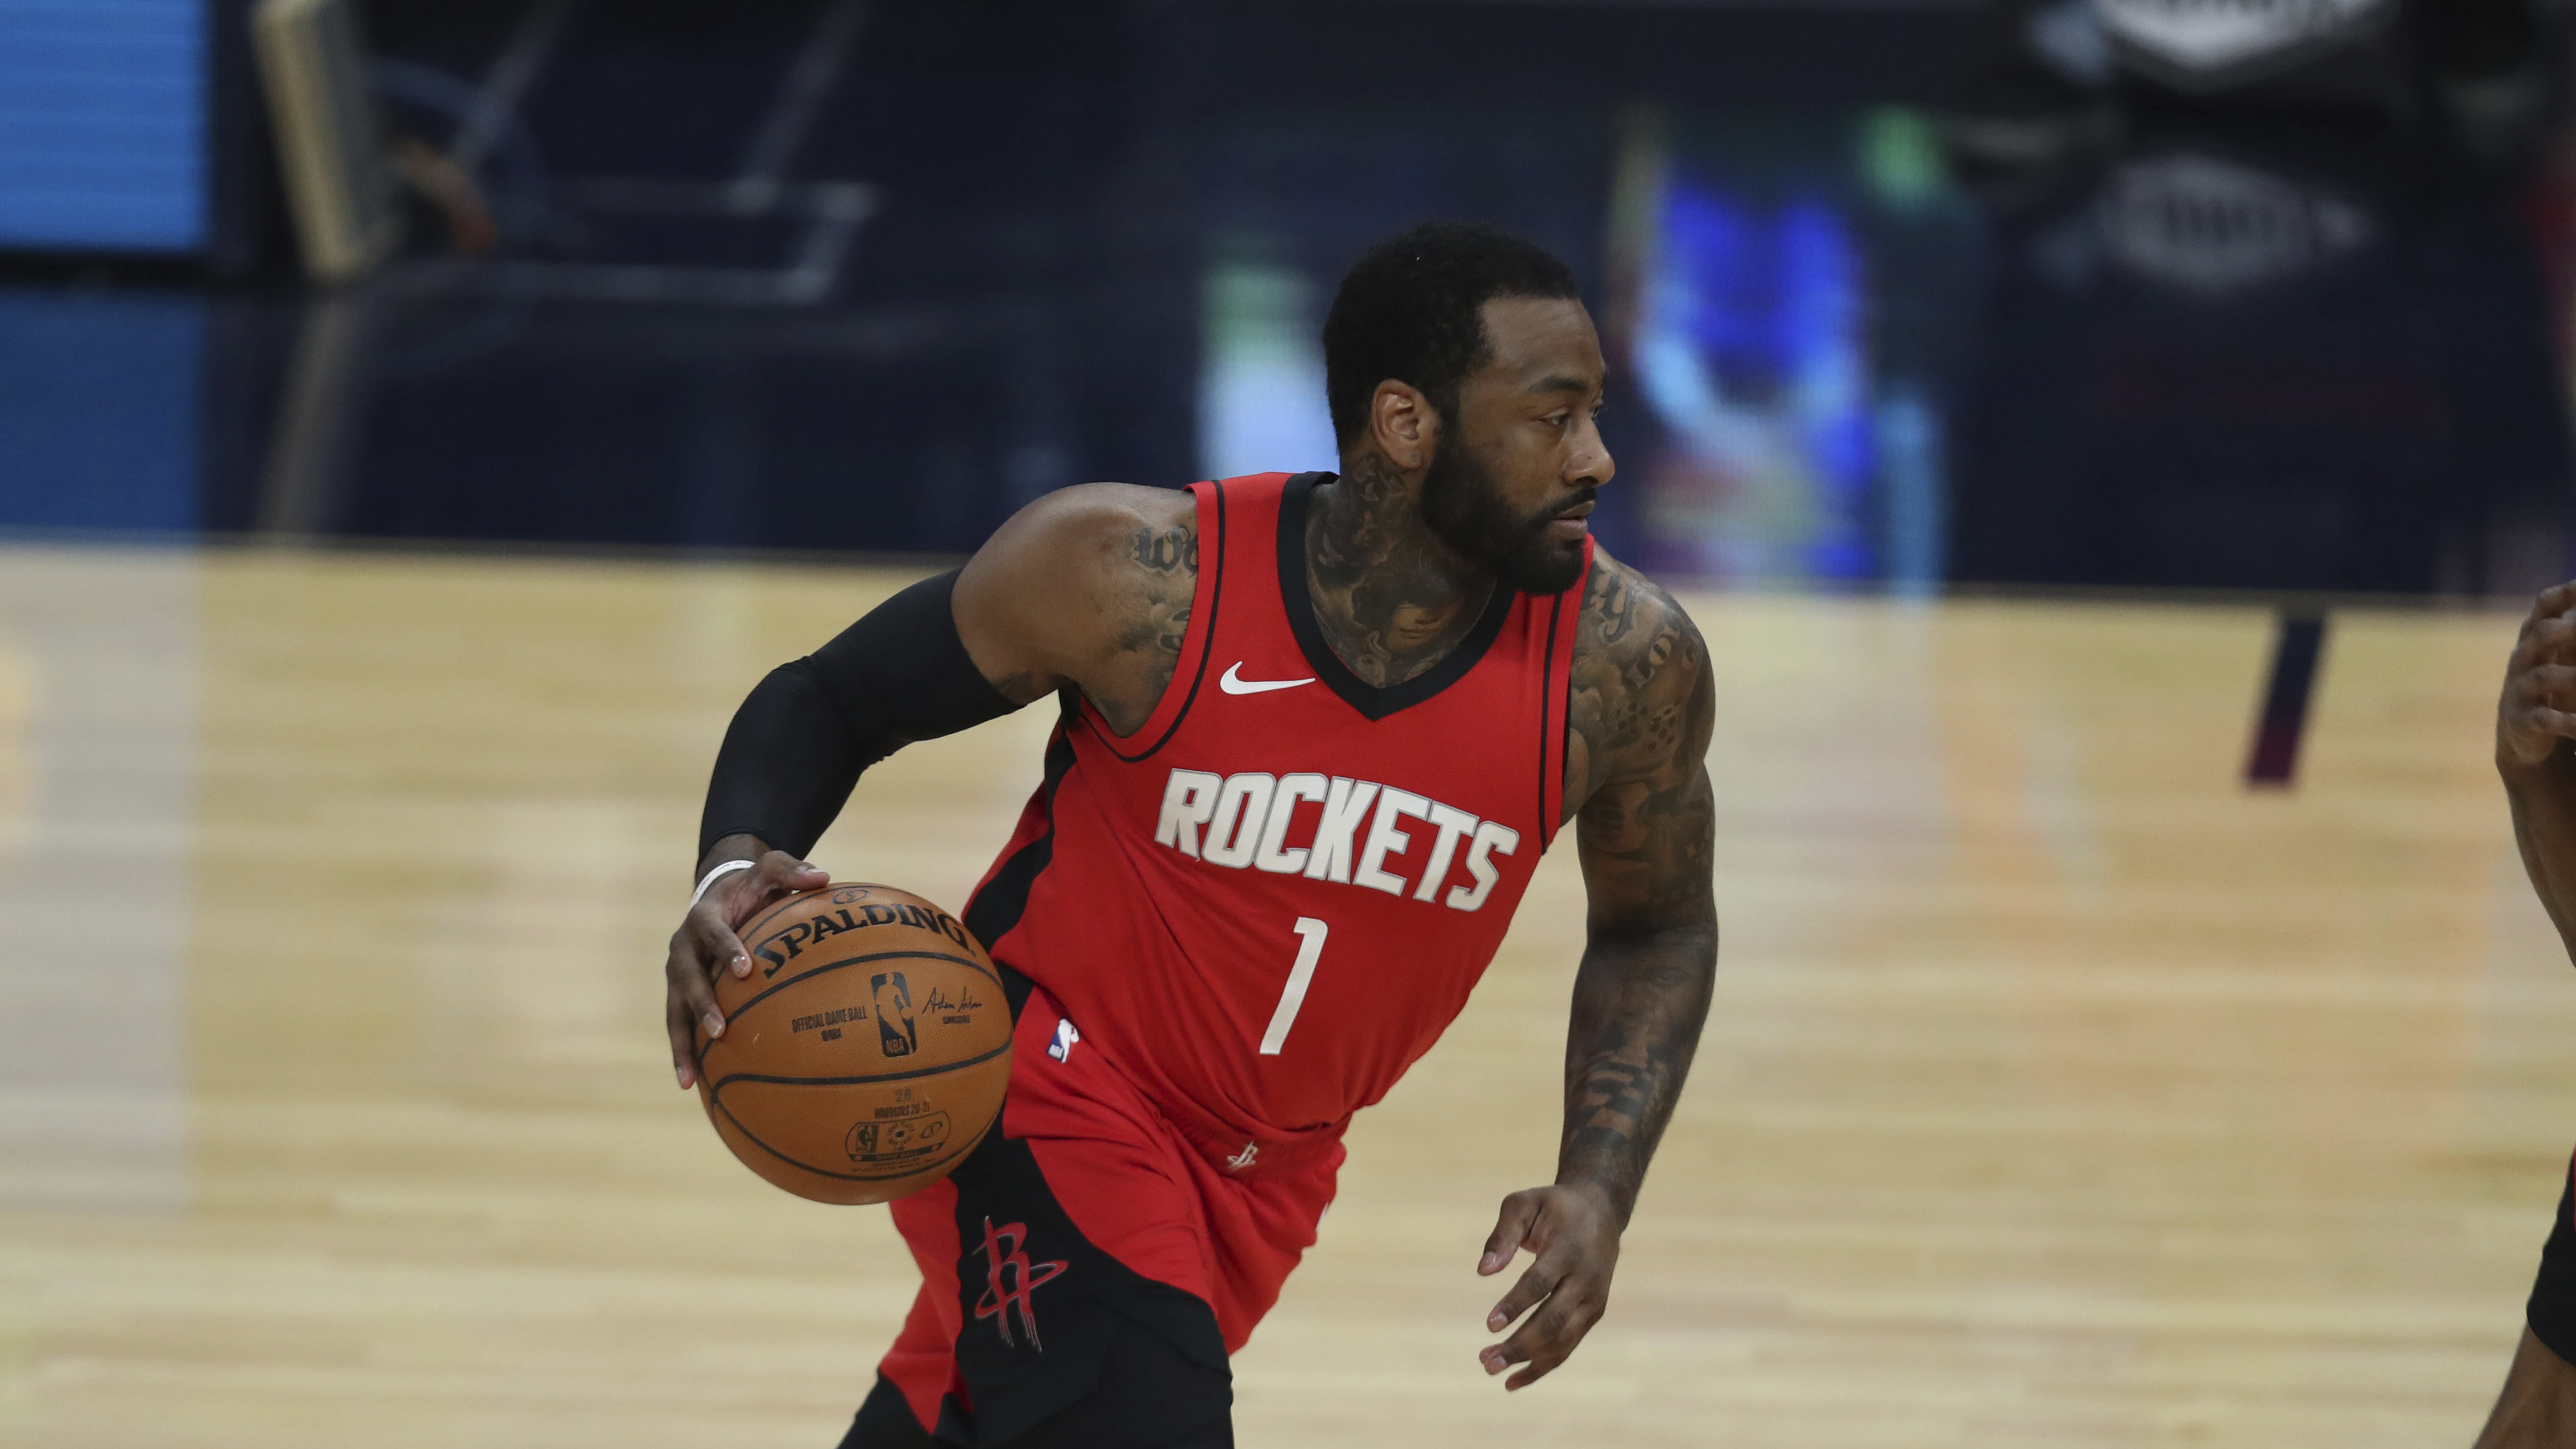 Sources - Houston Rockets, John Wall working to find trade deal - ESPN